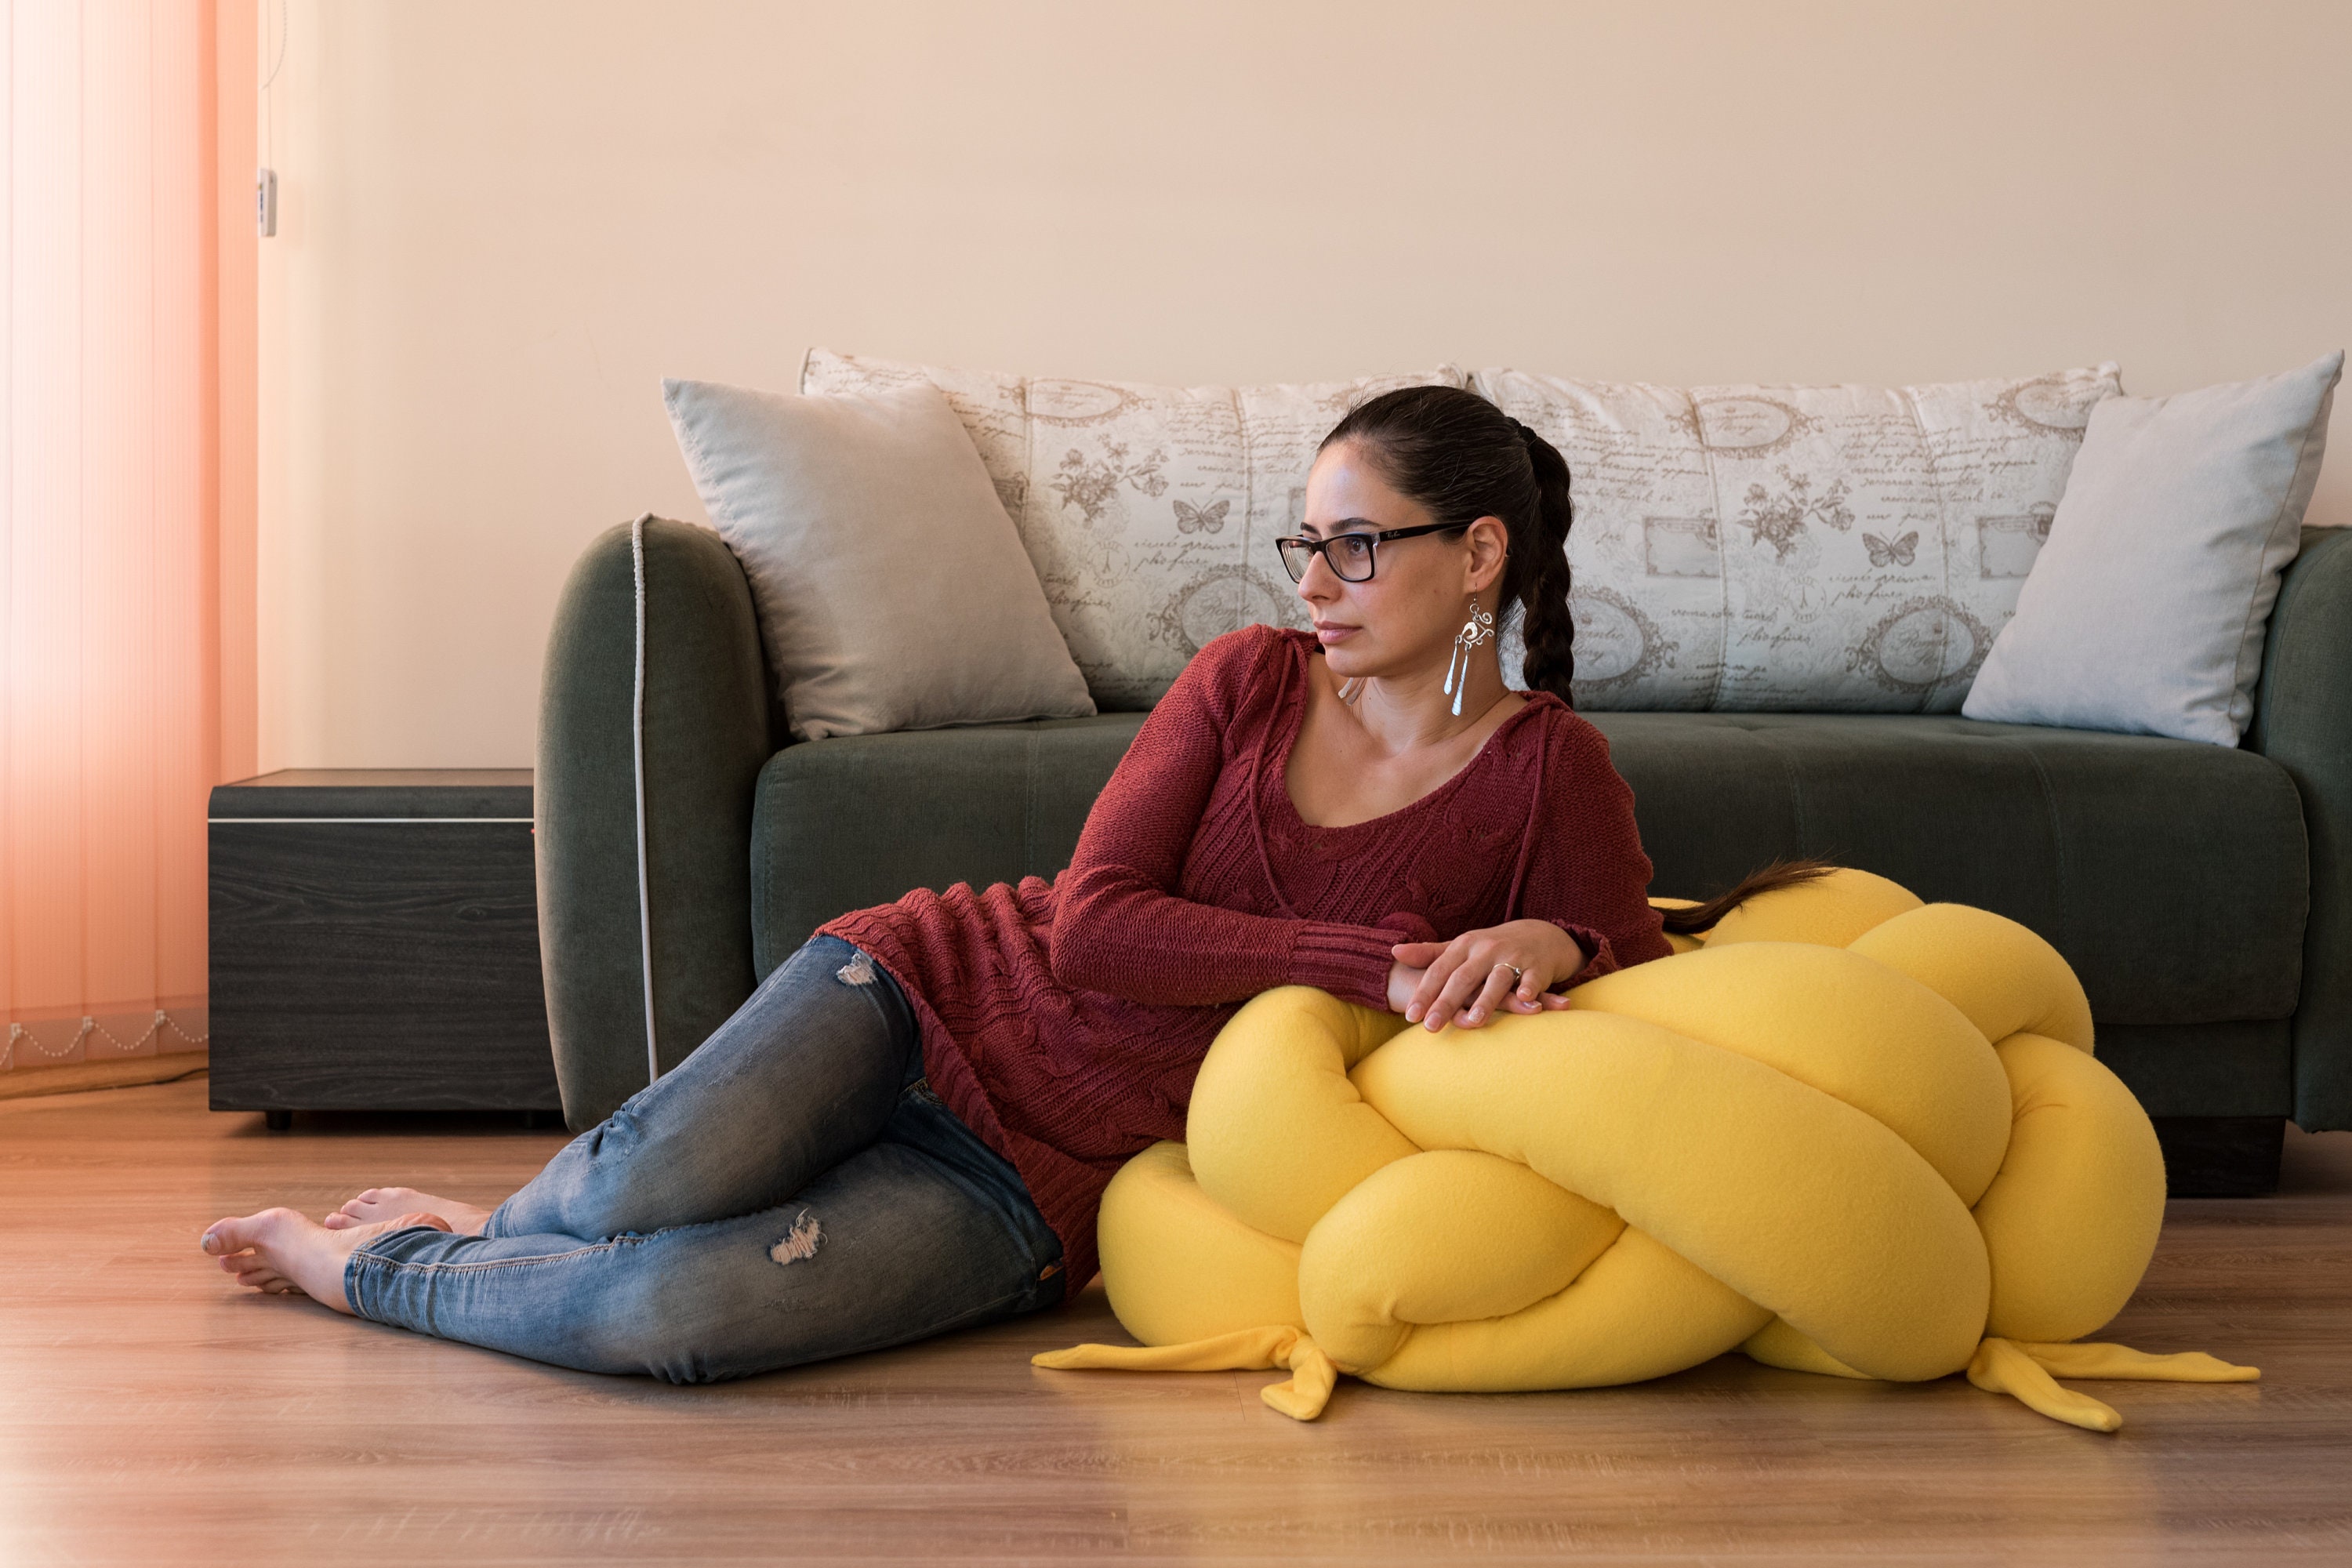 Large Knot Floor Cushion in Yellow, Knot Floor Pillow, Modern Pouf, Large  Pouf, Photo Prop Furniture, Meditation Pillow, Giant Floor Pillow 